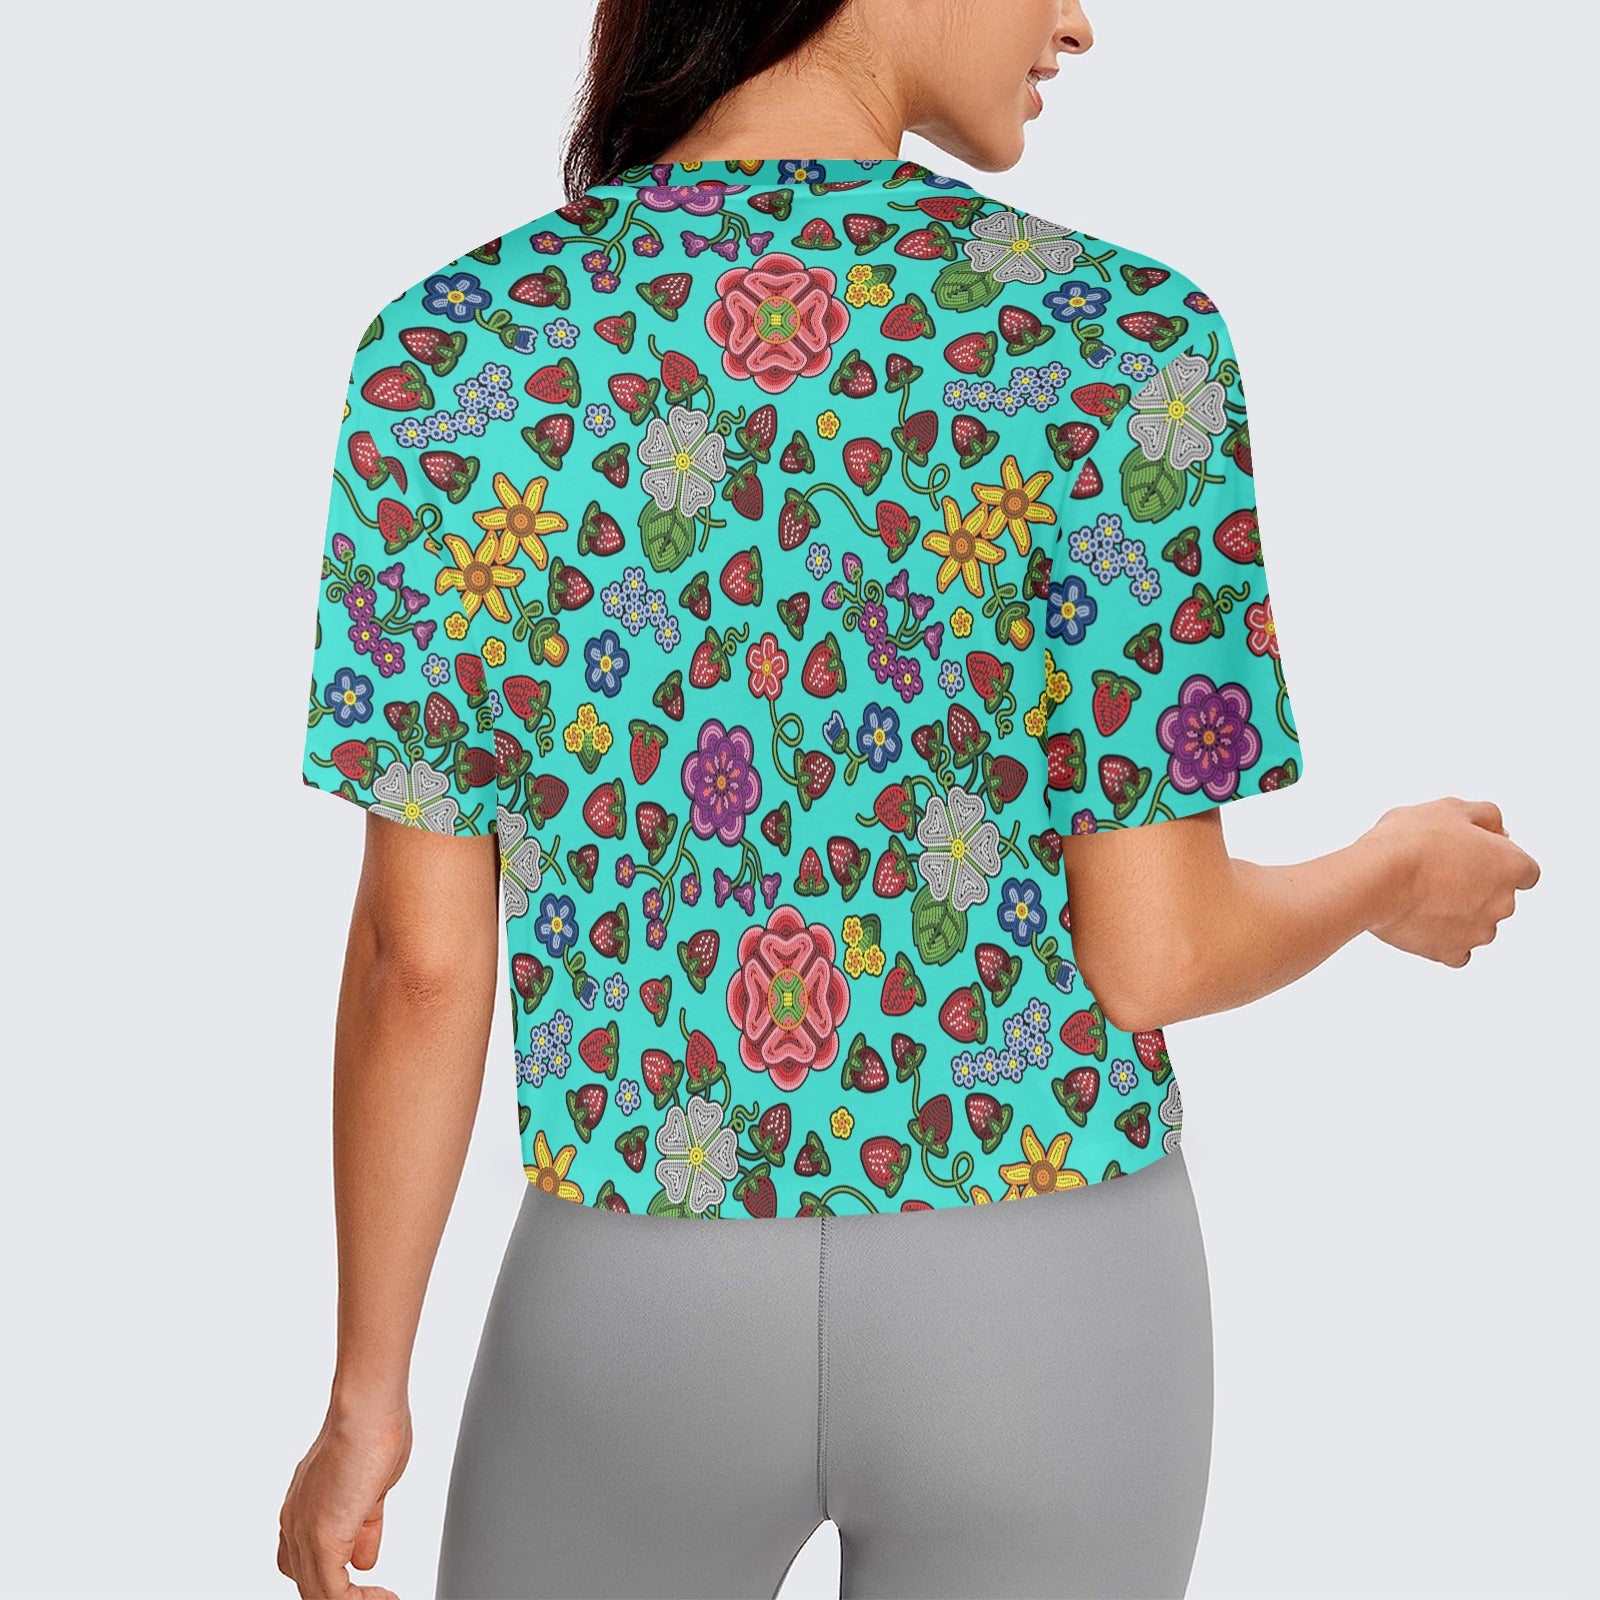 Berry Pop Turquoise Women's Cropped T-shirt